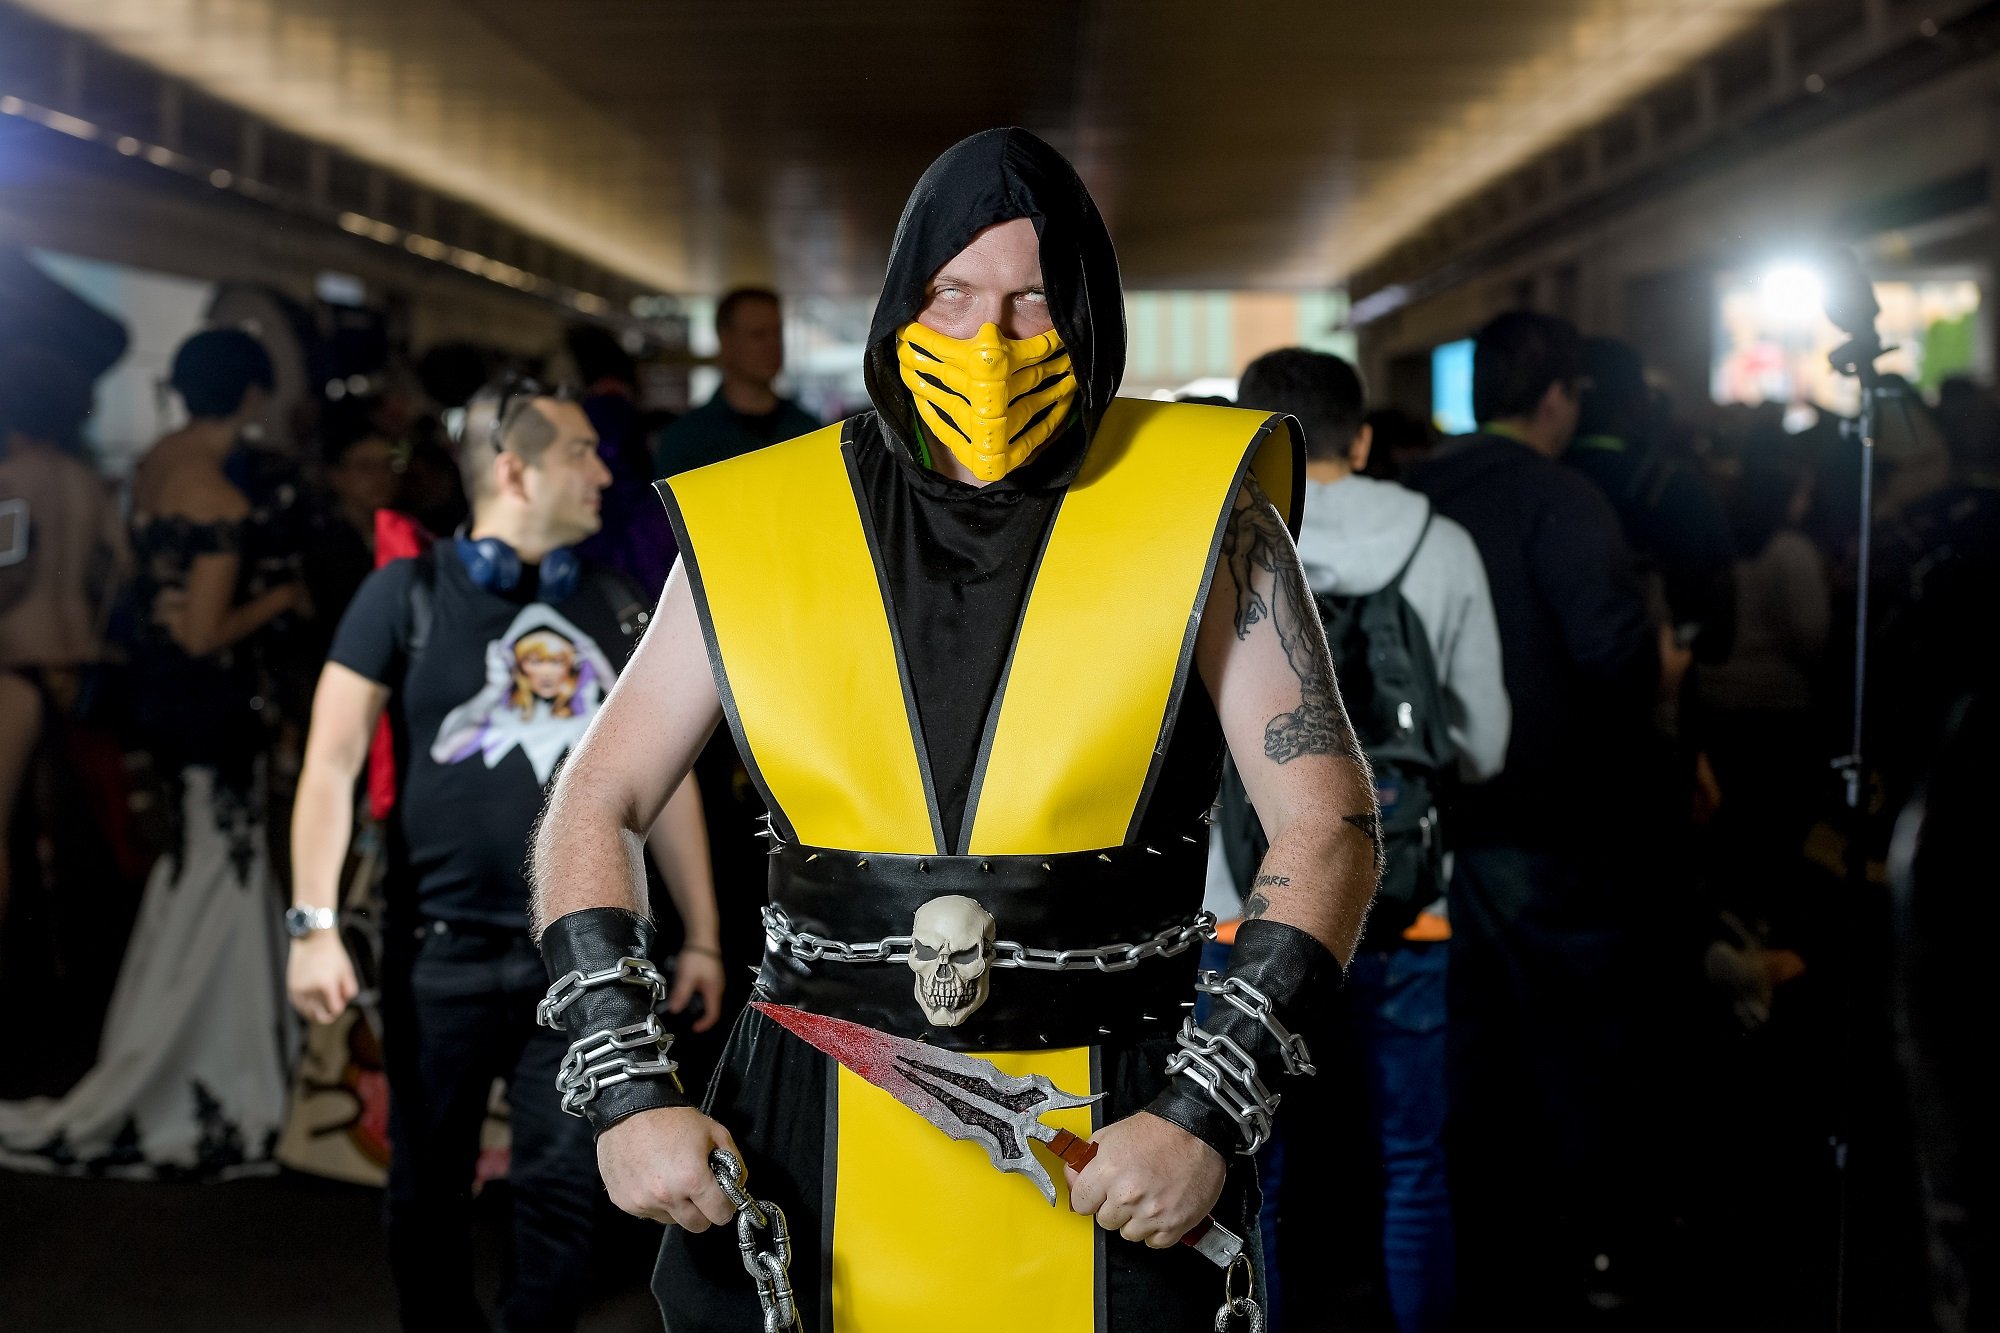 A fan cosplays as Scorpion from Mortal Kombat during the 2018 New York Comic Con